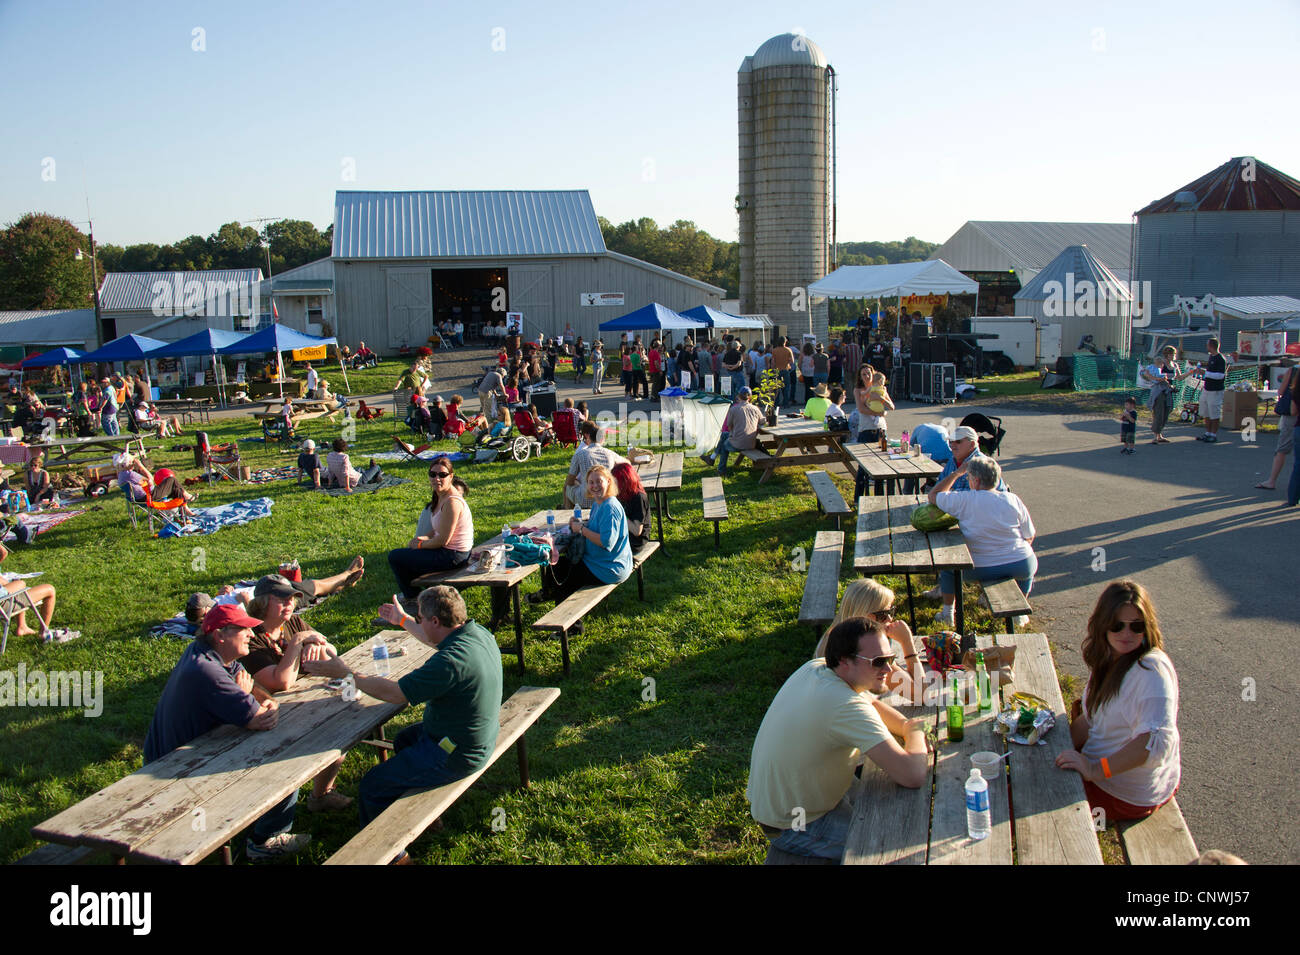 Festival with crowds at picnic tables and lounging in grass on a farm Stock Photo